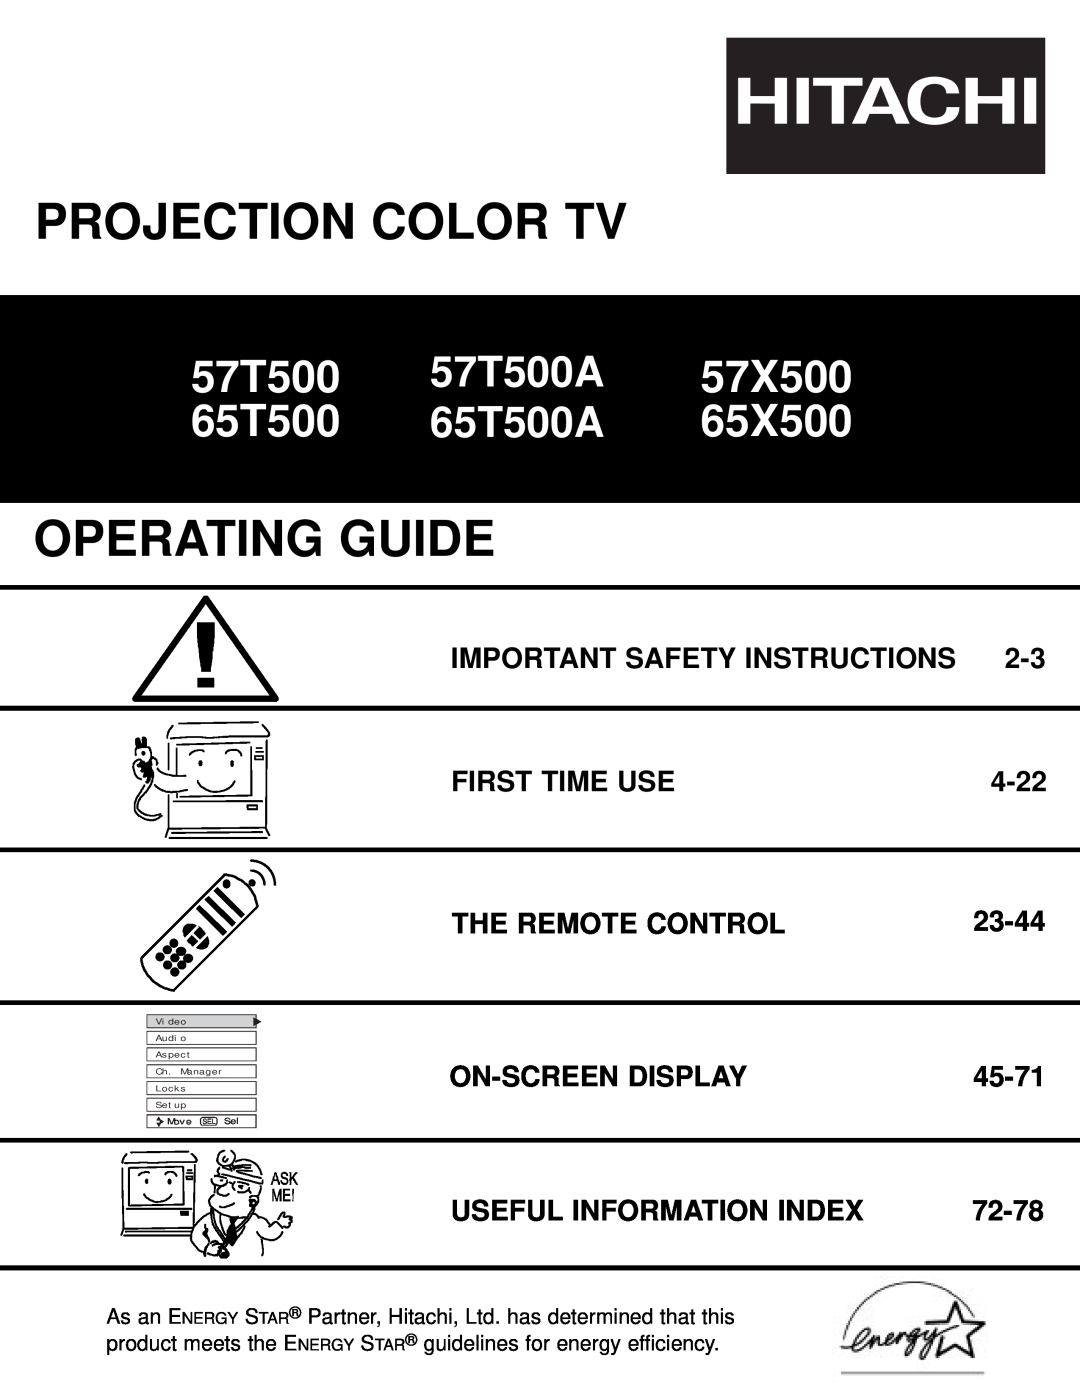 Hitachi 57T500A important safety instructions Important Safety Instructions, First Time Use, 4-22, The Remote Control 